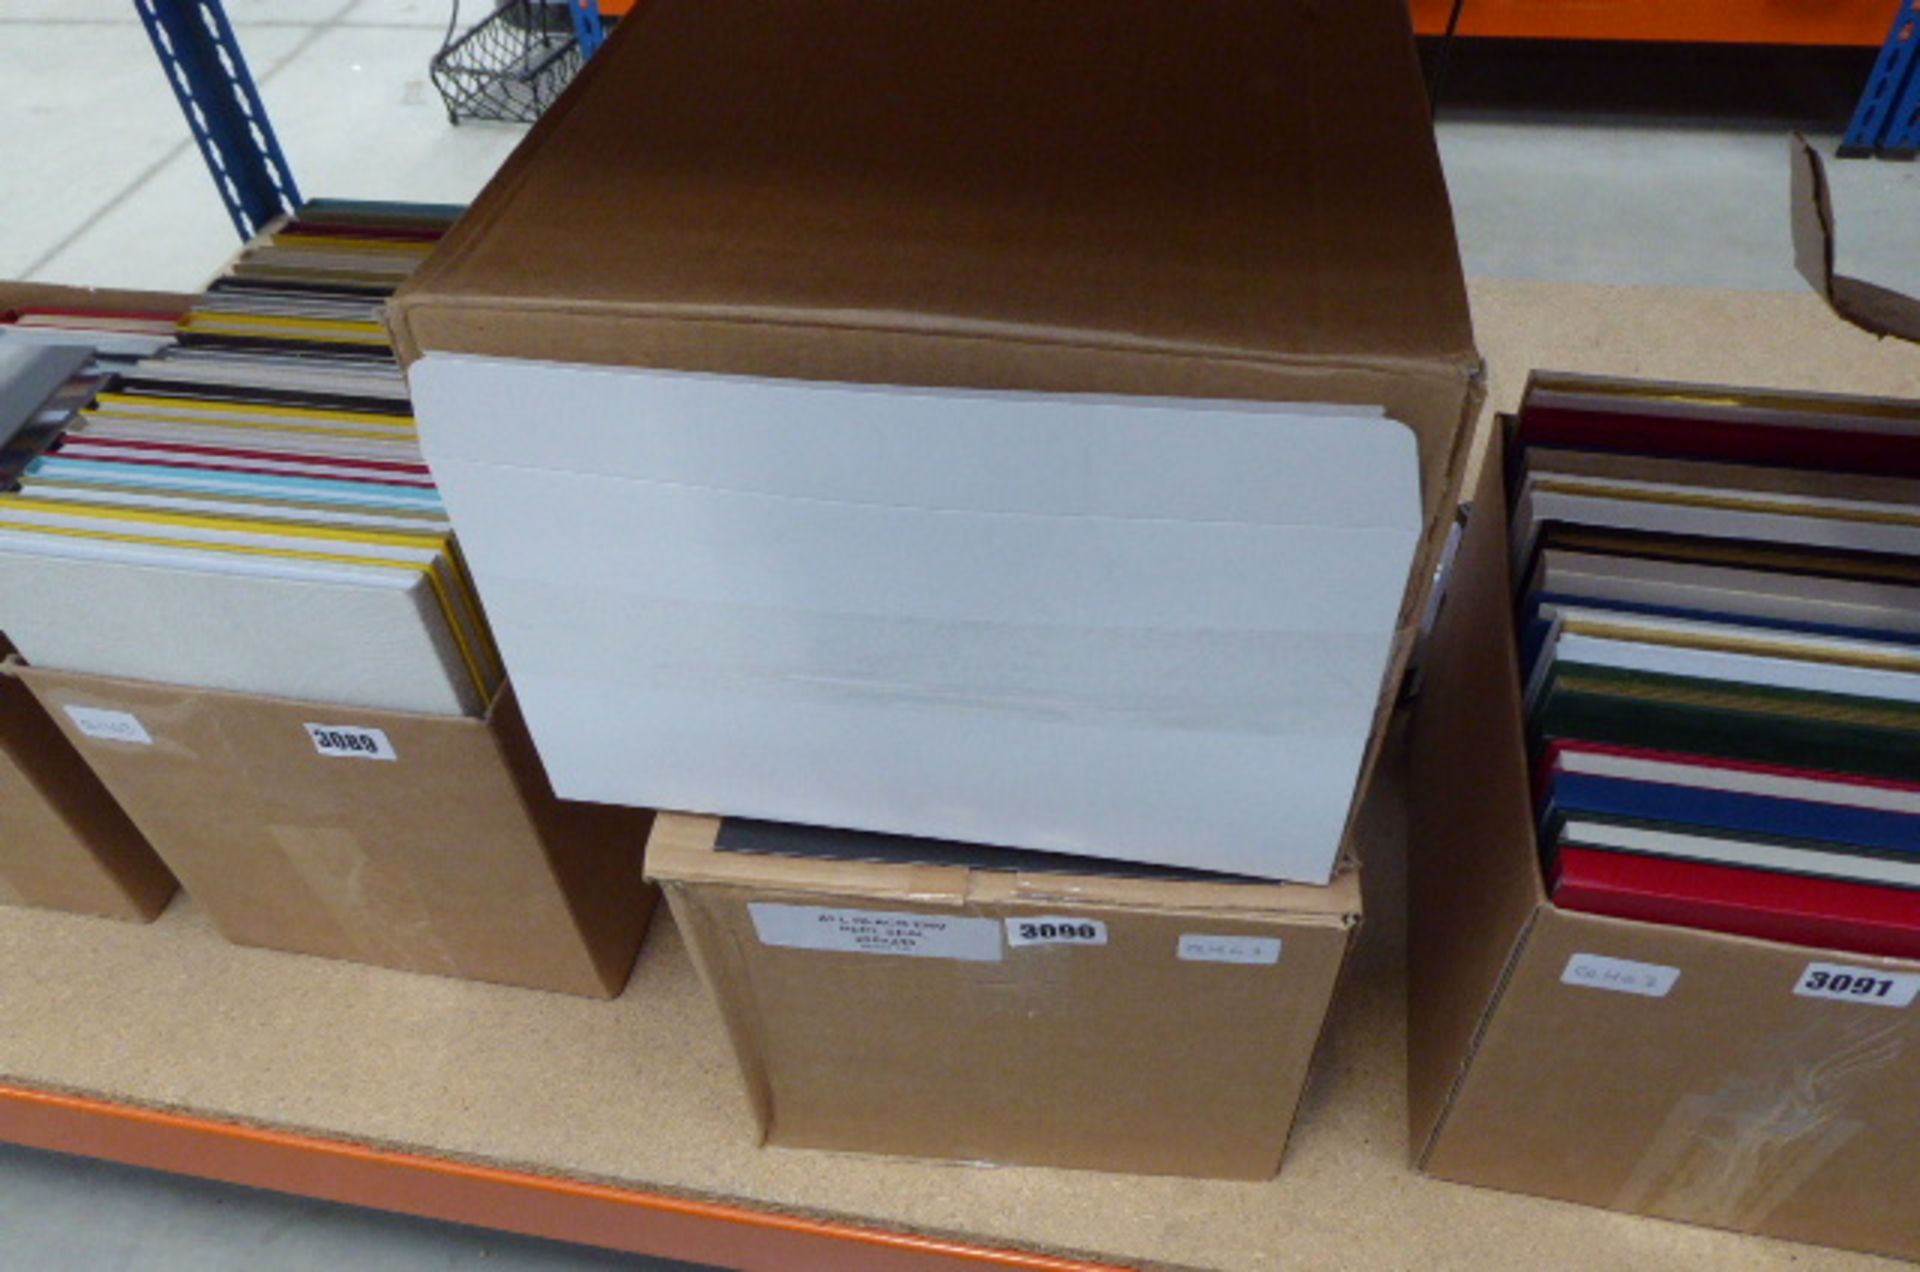 Two boxes containing card envelopes